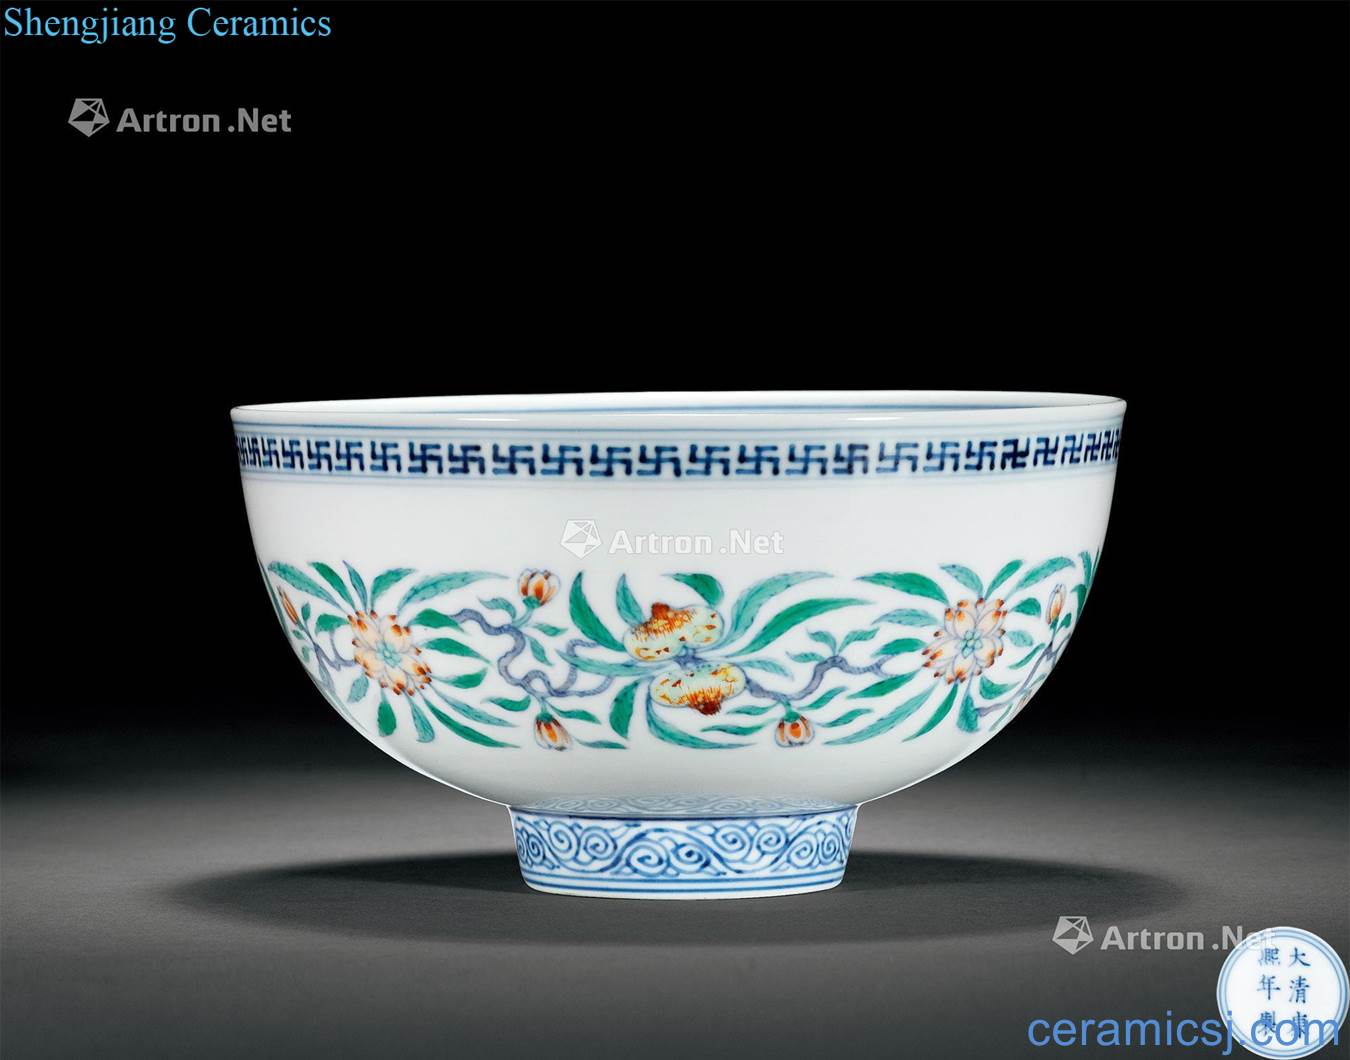 The qing emperor kangxi bucket colors branch flowers and plants "flower drum" mouth bowl straight